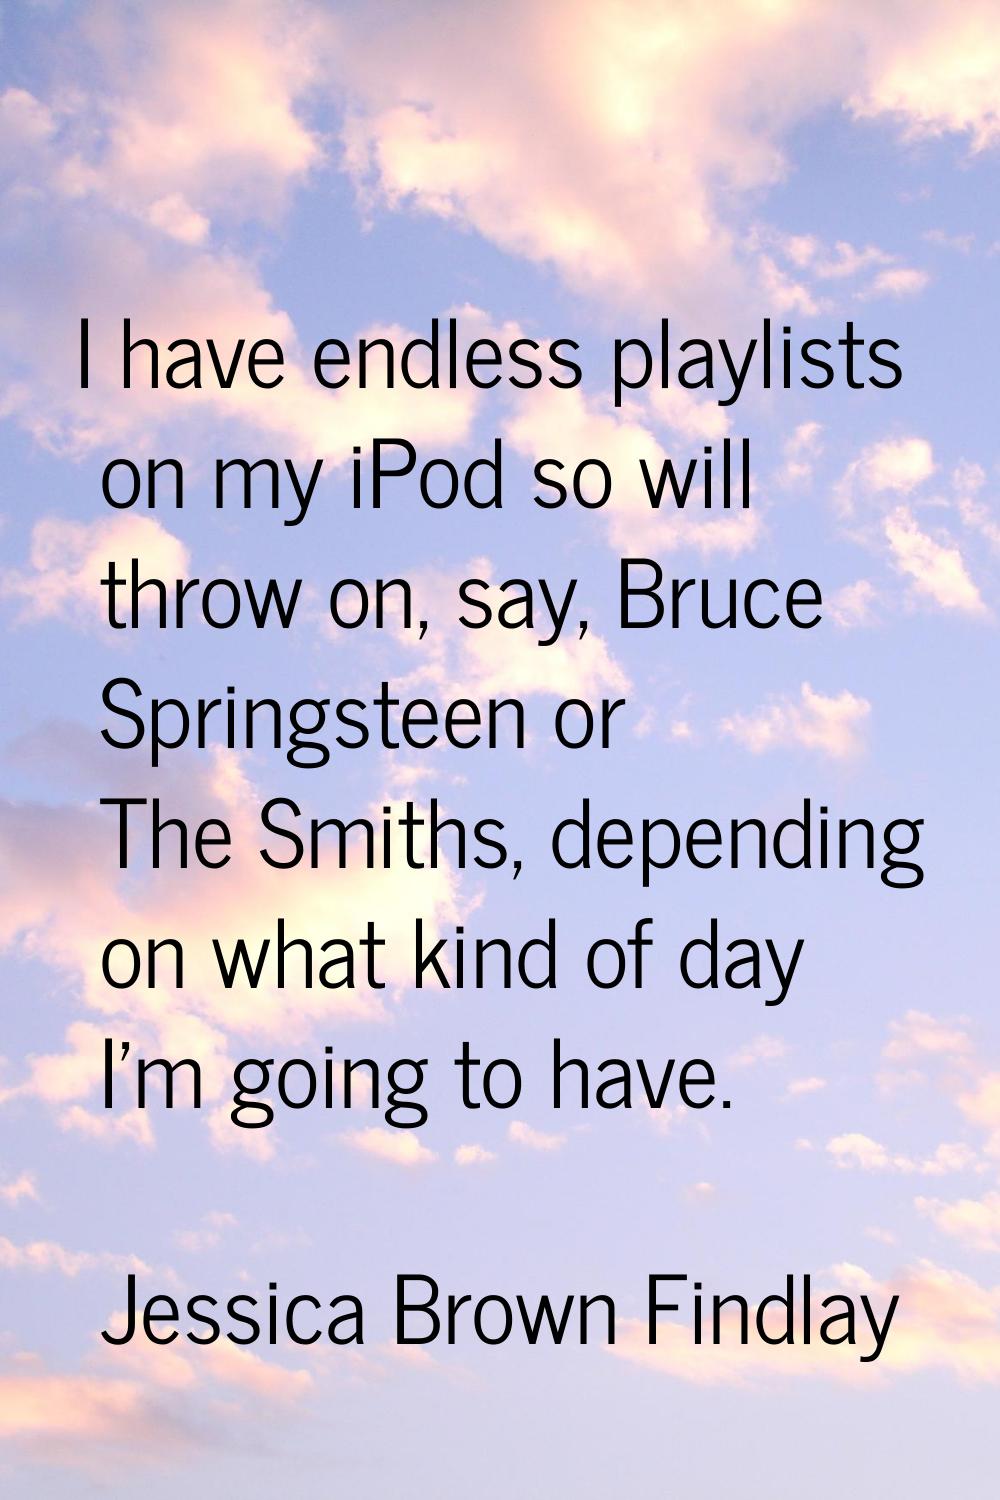 I have endless playlists on my iPod so will throw on, say, Bruce Springsteen or The Smiths, dependi